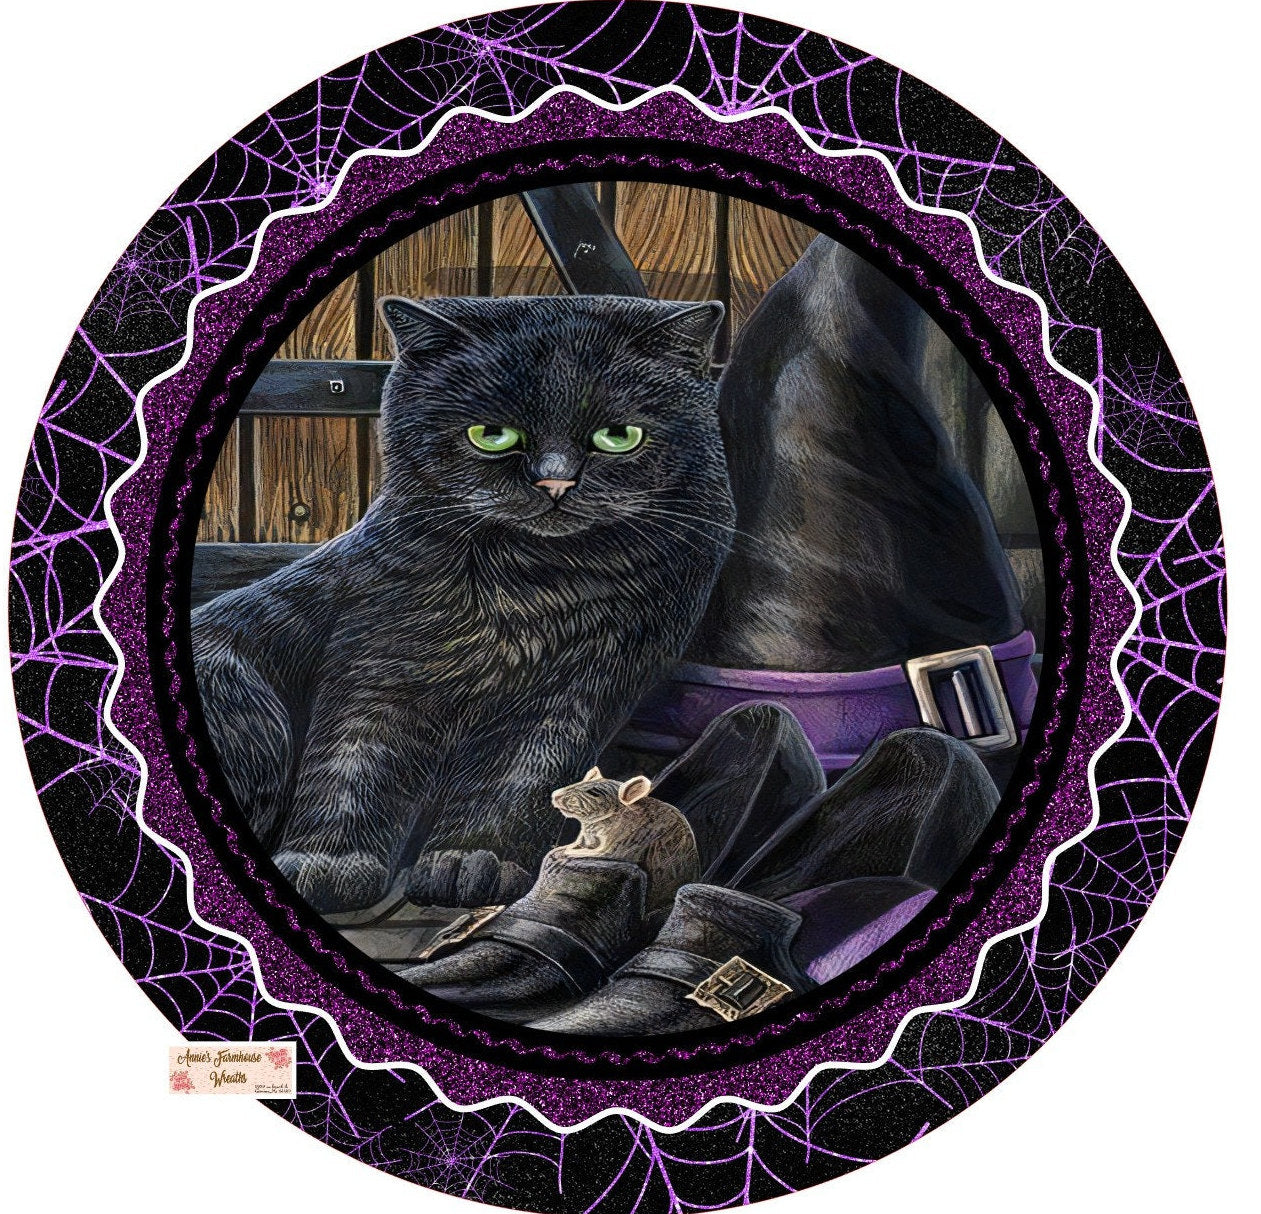 Black witch cat round metal sign, Halloween cat wreath sign, black and purple wreath center, wreath attachment. cat and pumpkin